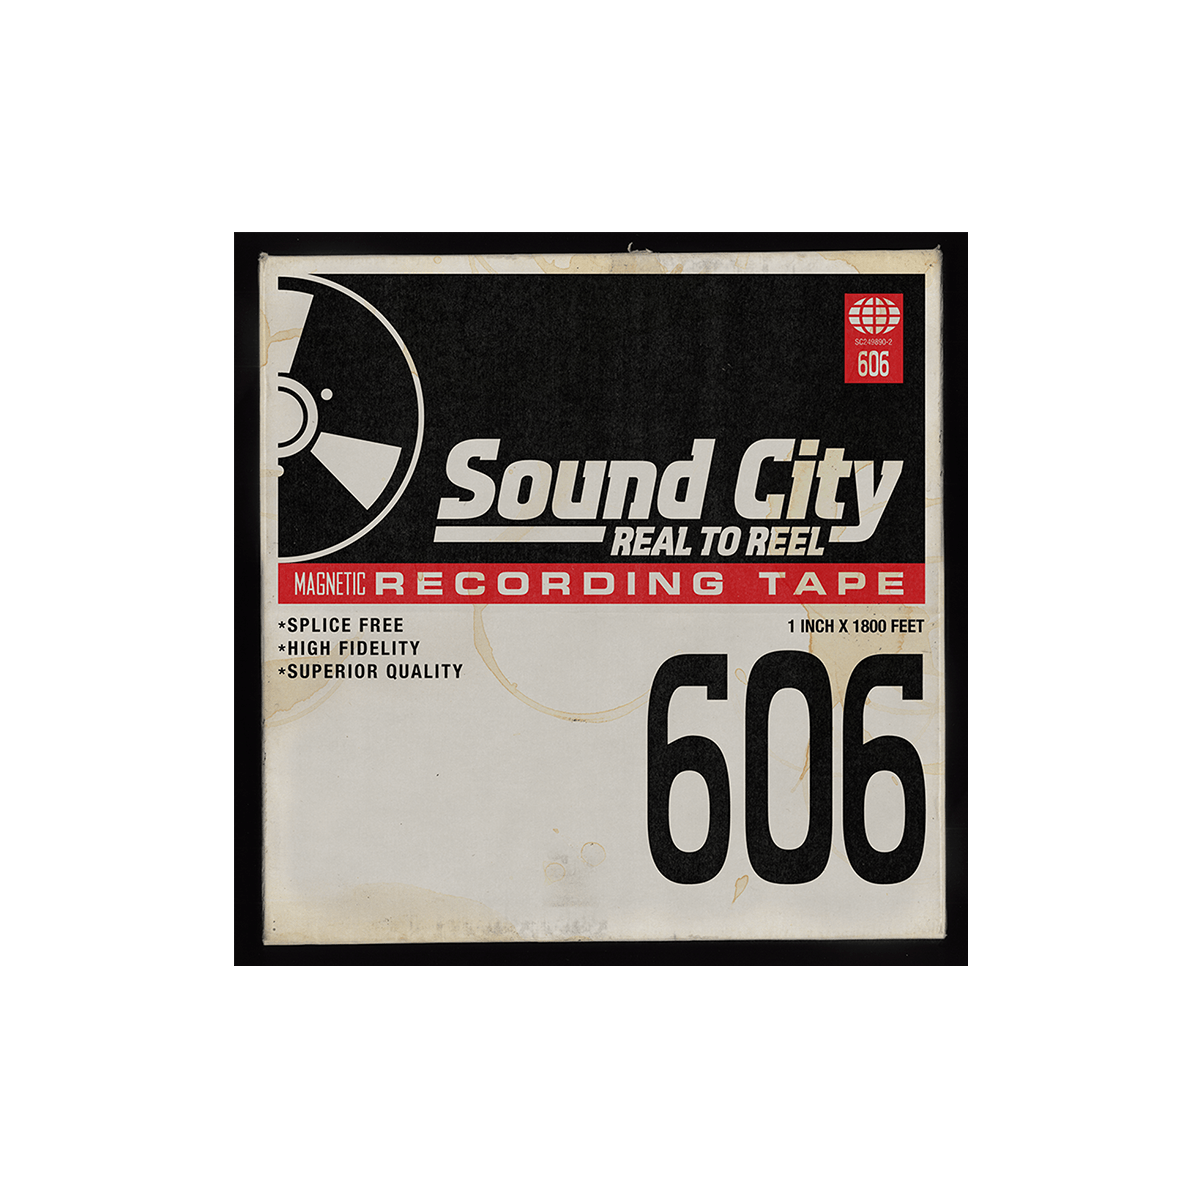 Sound City: Real to Reel Vinyl – Foo Fighters Store